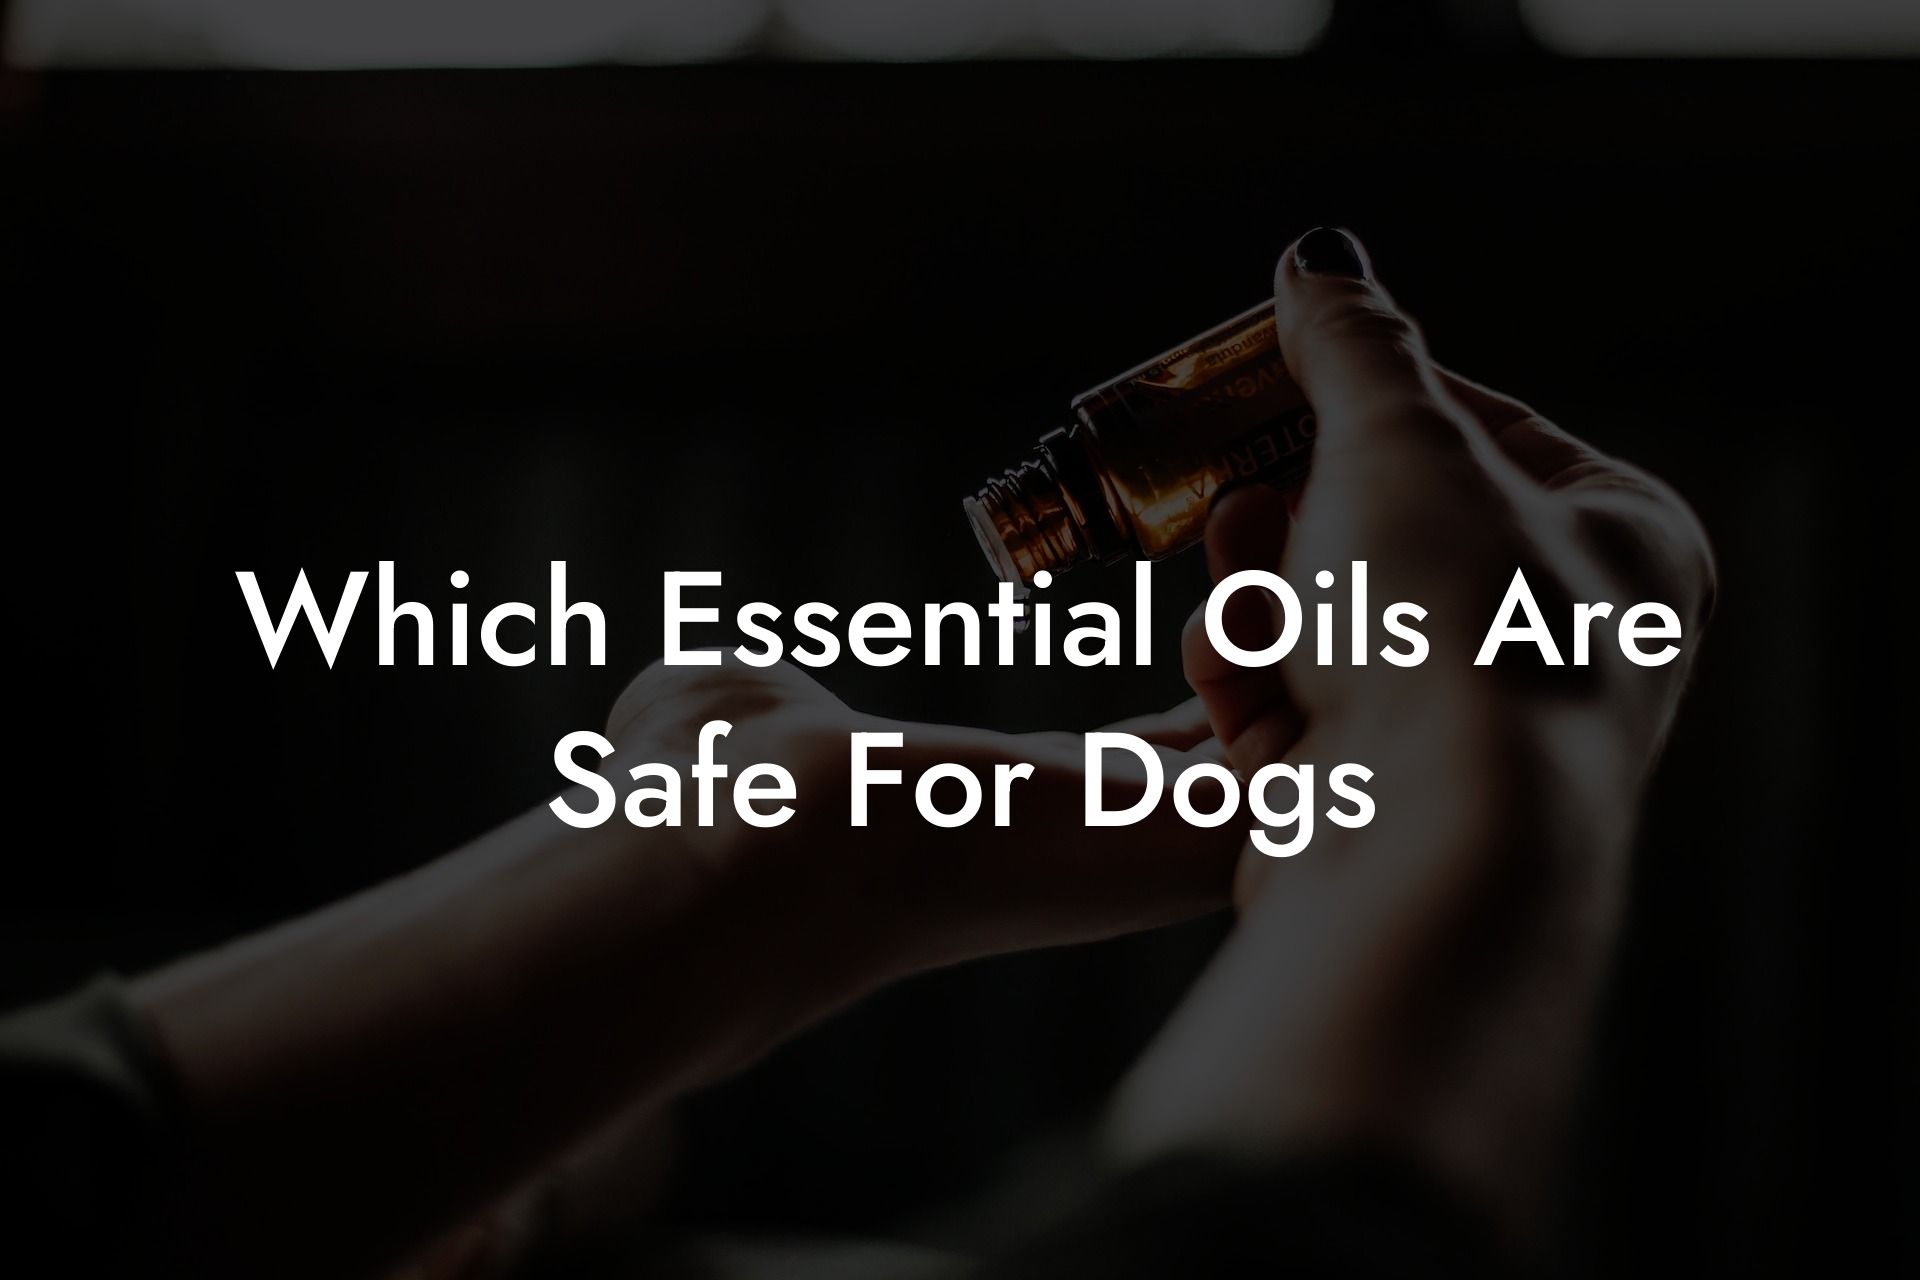 Which Essential Oils Are Safe For Dogs